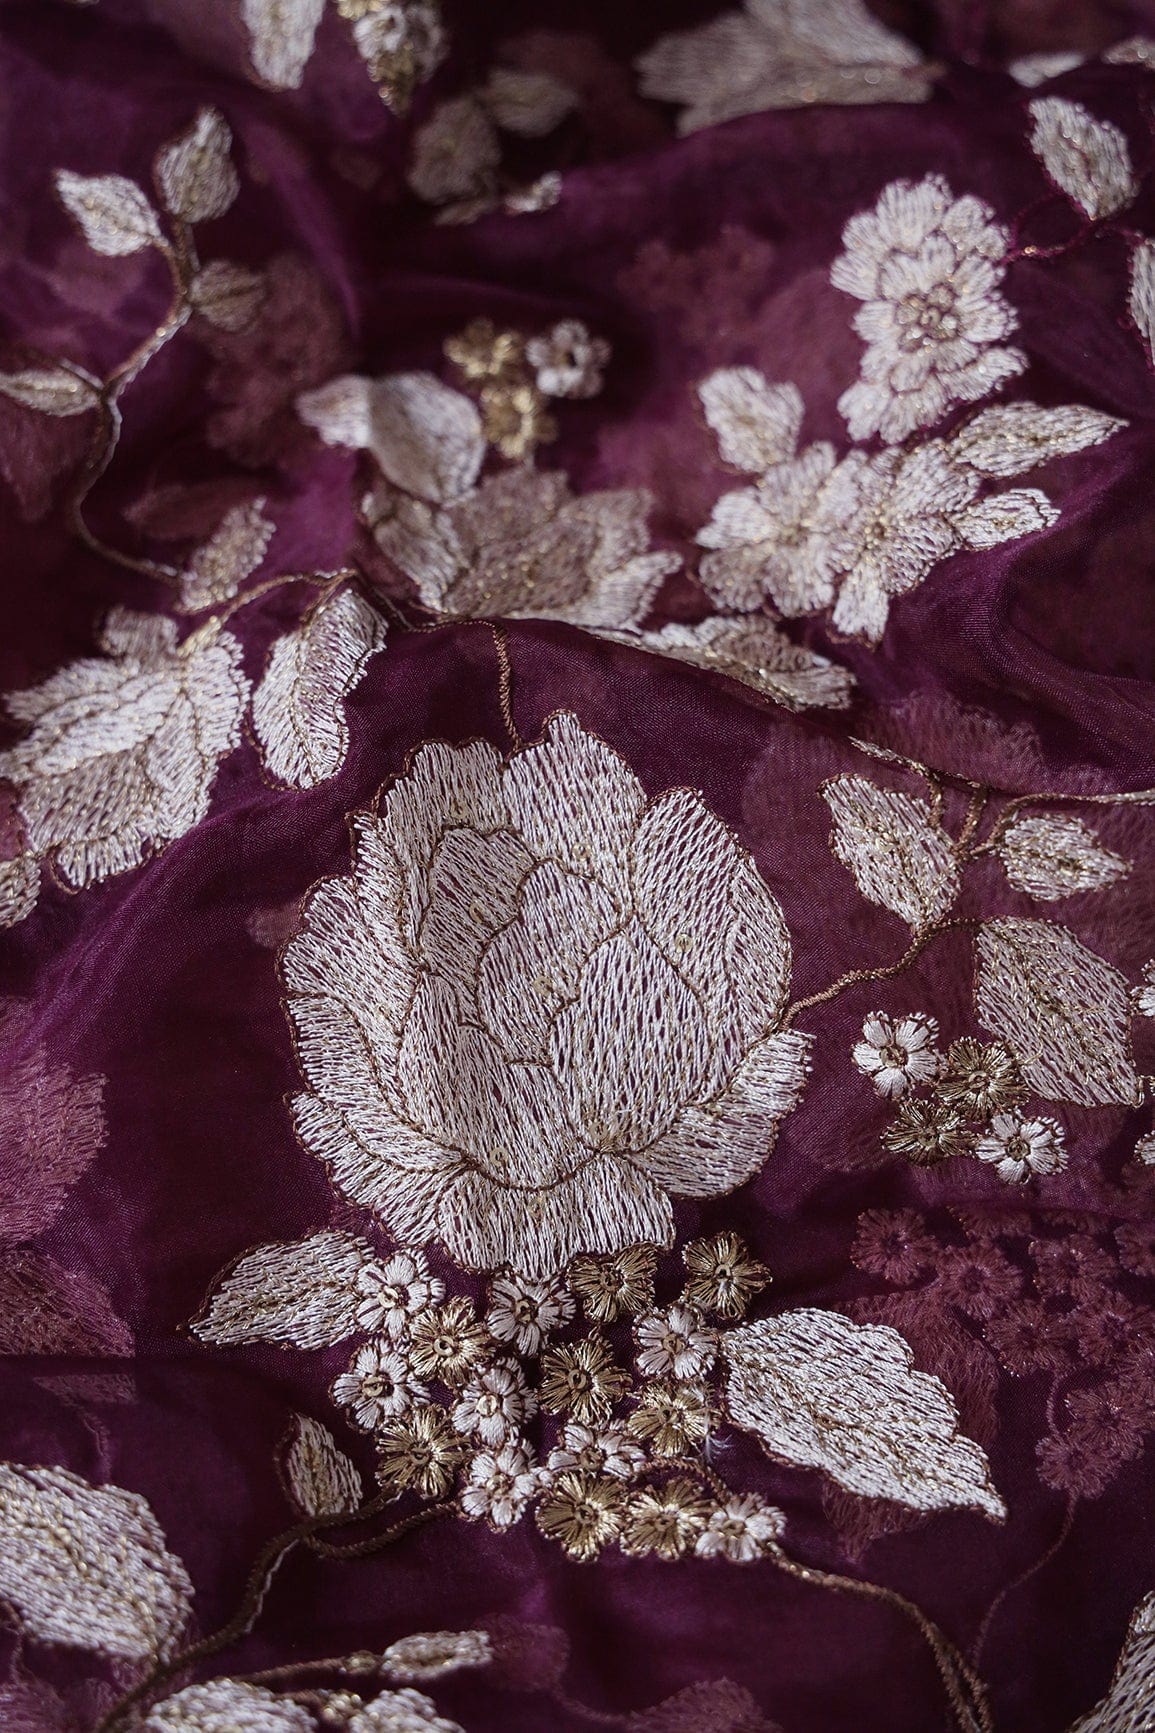 doeraa Embroidery Fabrics 1 Meter Cut Piece Of Off White Thread With Gold Zari Floral Embroidery Work On Dark Purple Organza Fabric